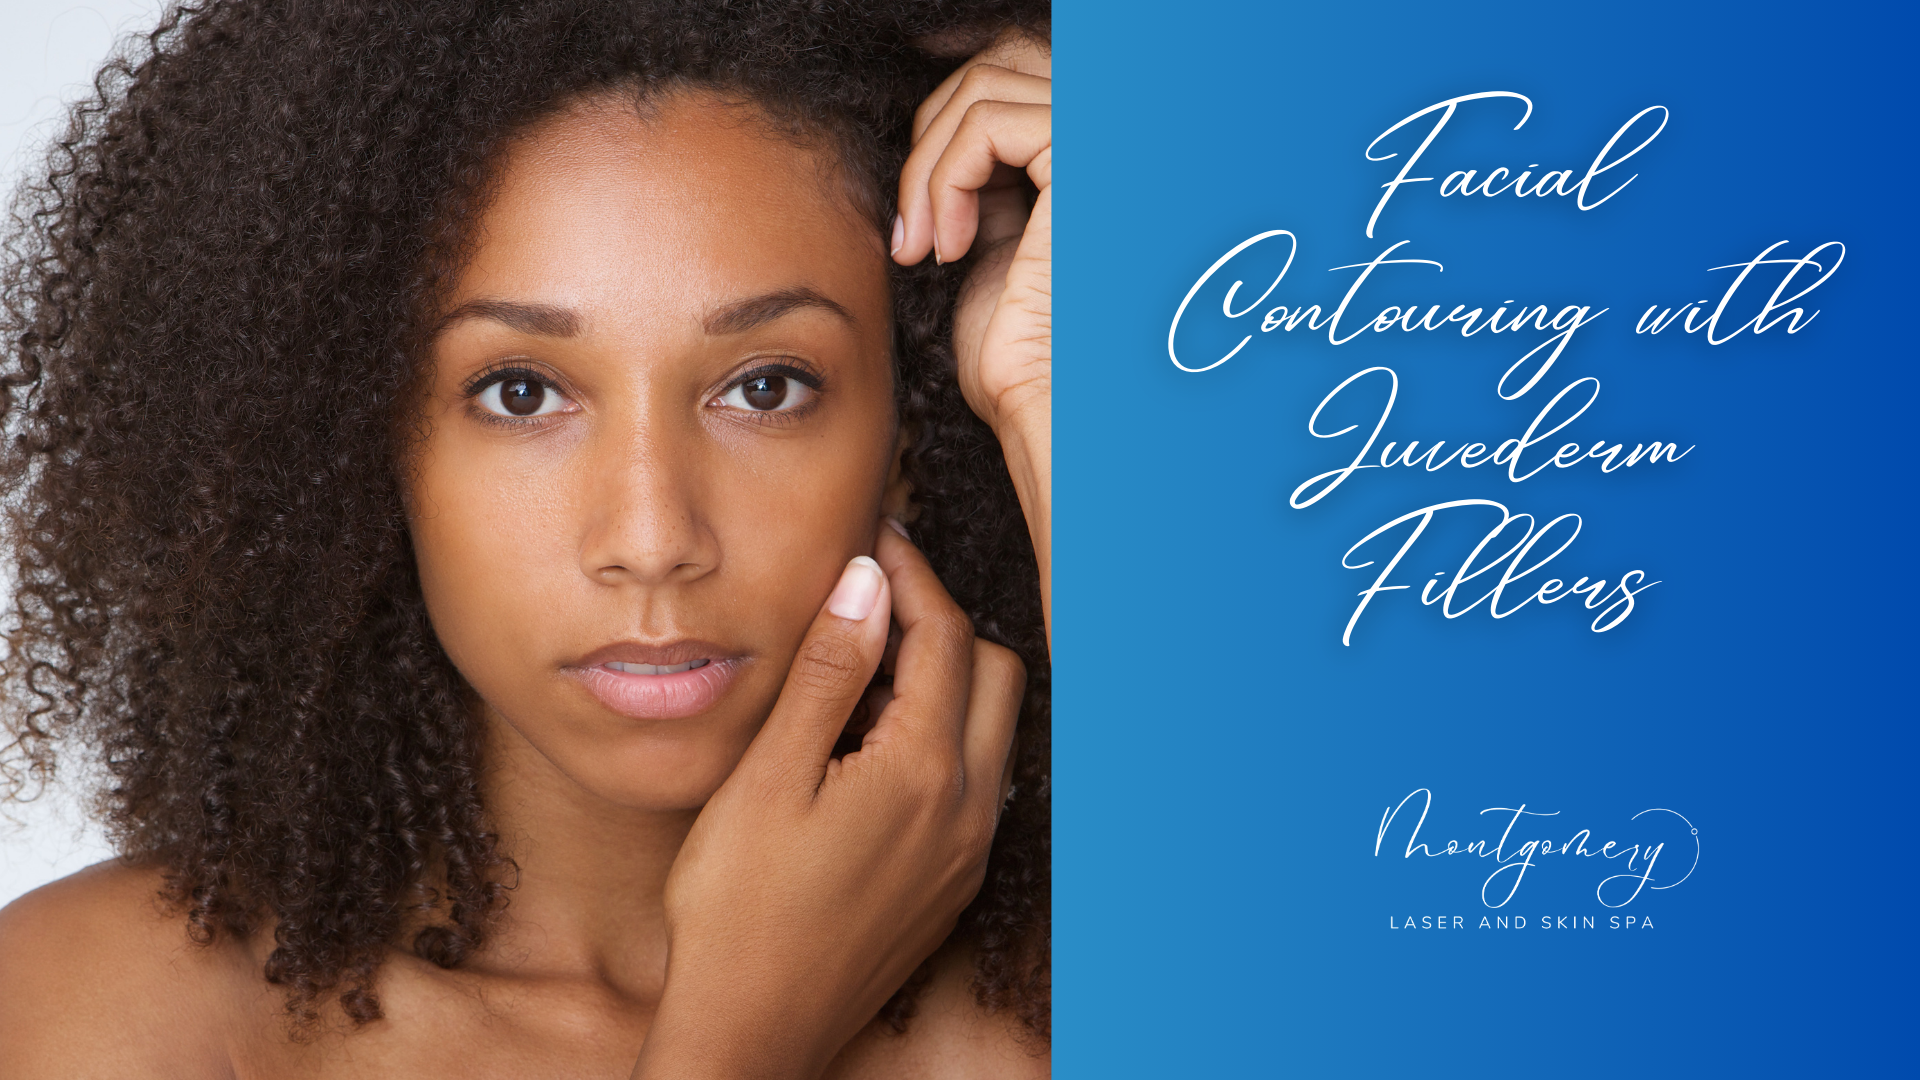 Facial Contouring with Juvederm Fillers at Montgomery Laser and Skin Spa